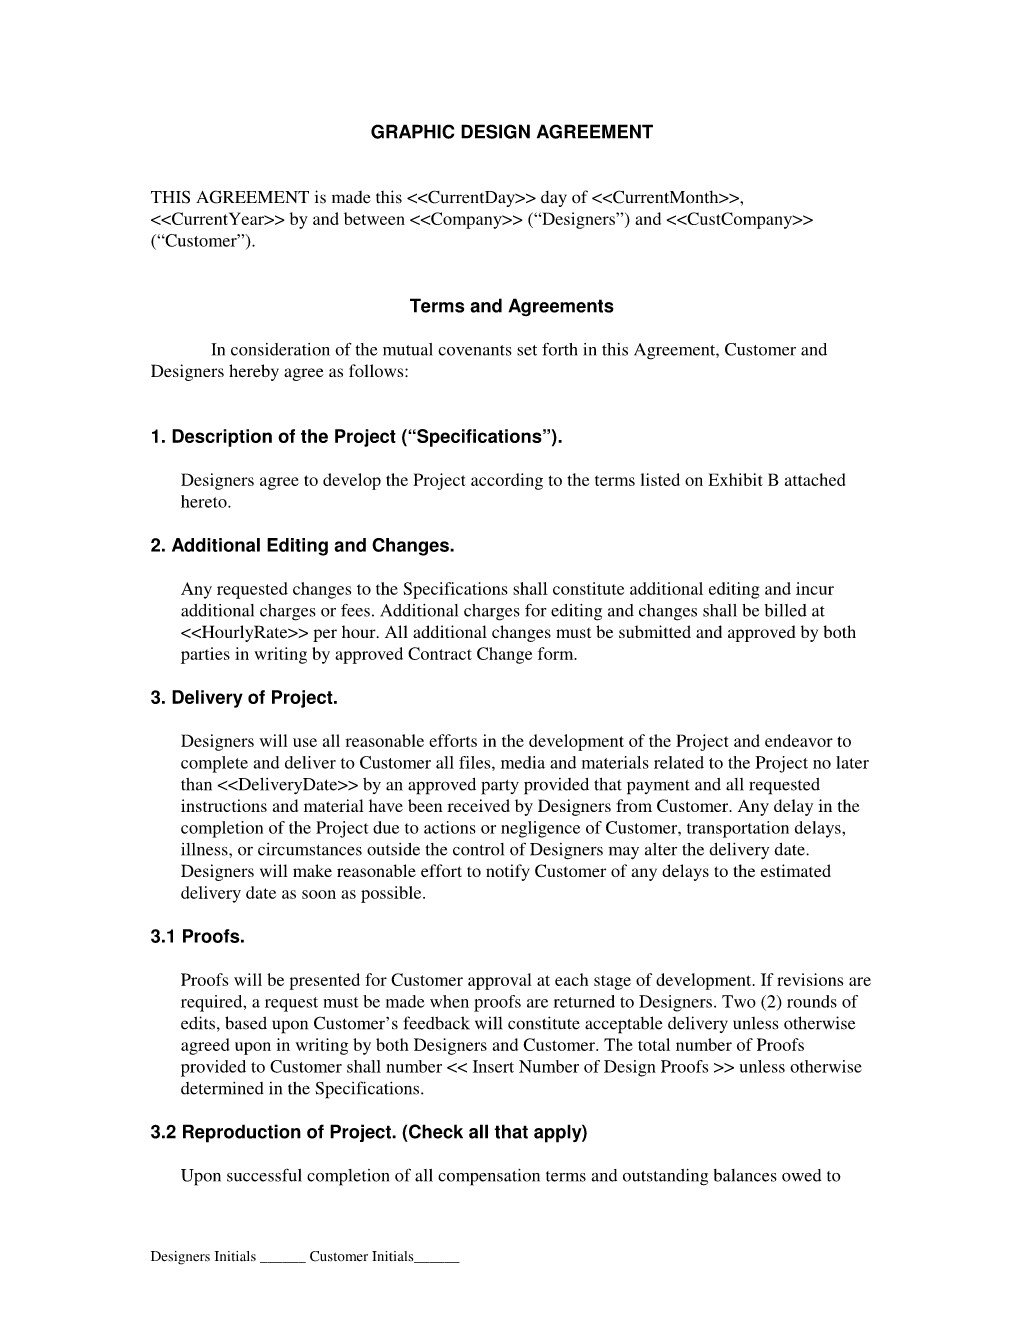 Graphic Design Contract Agreement